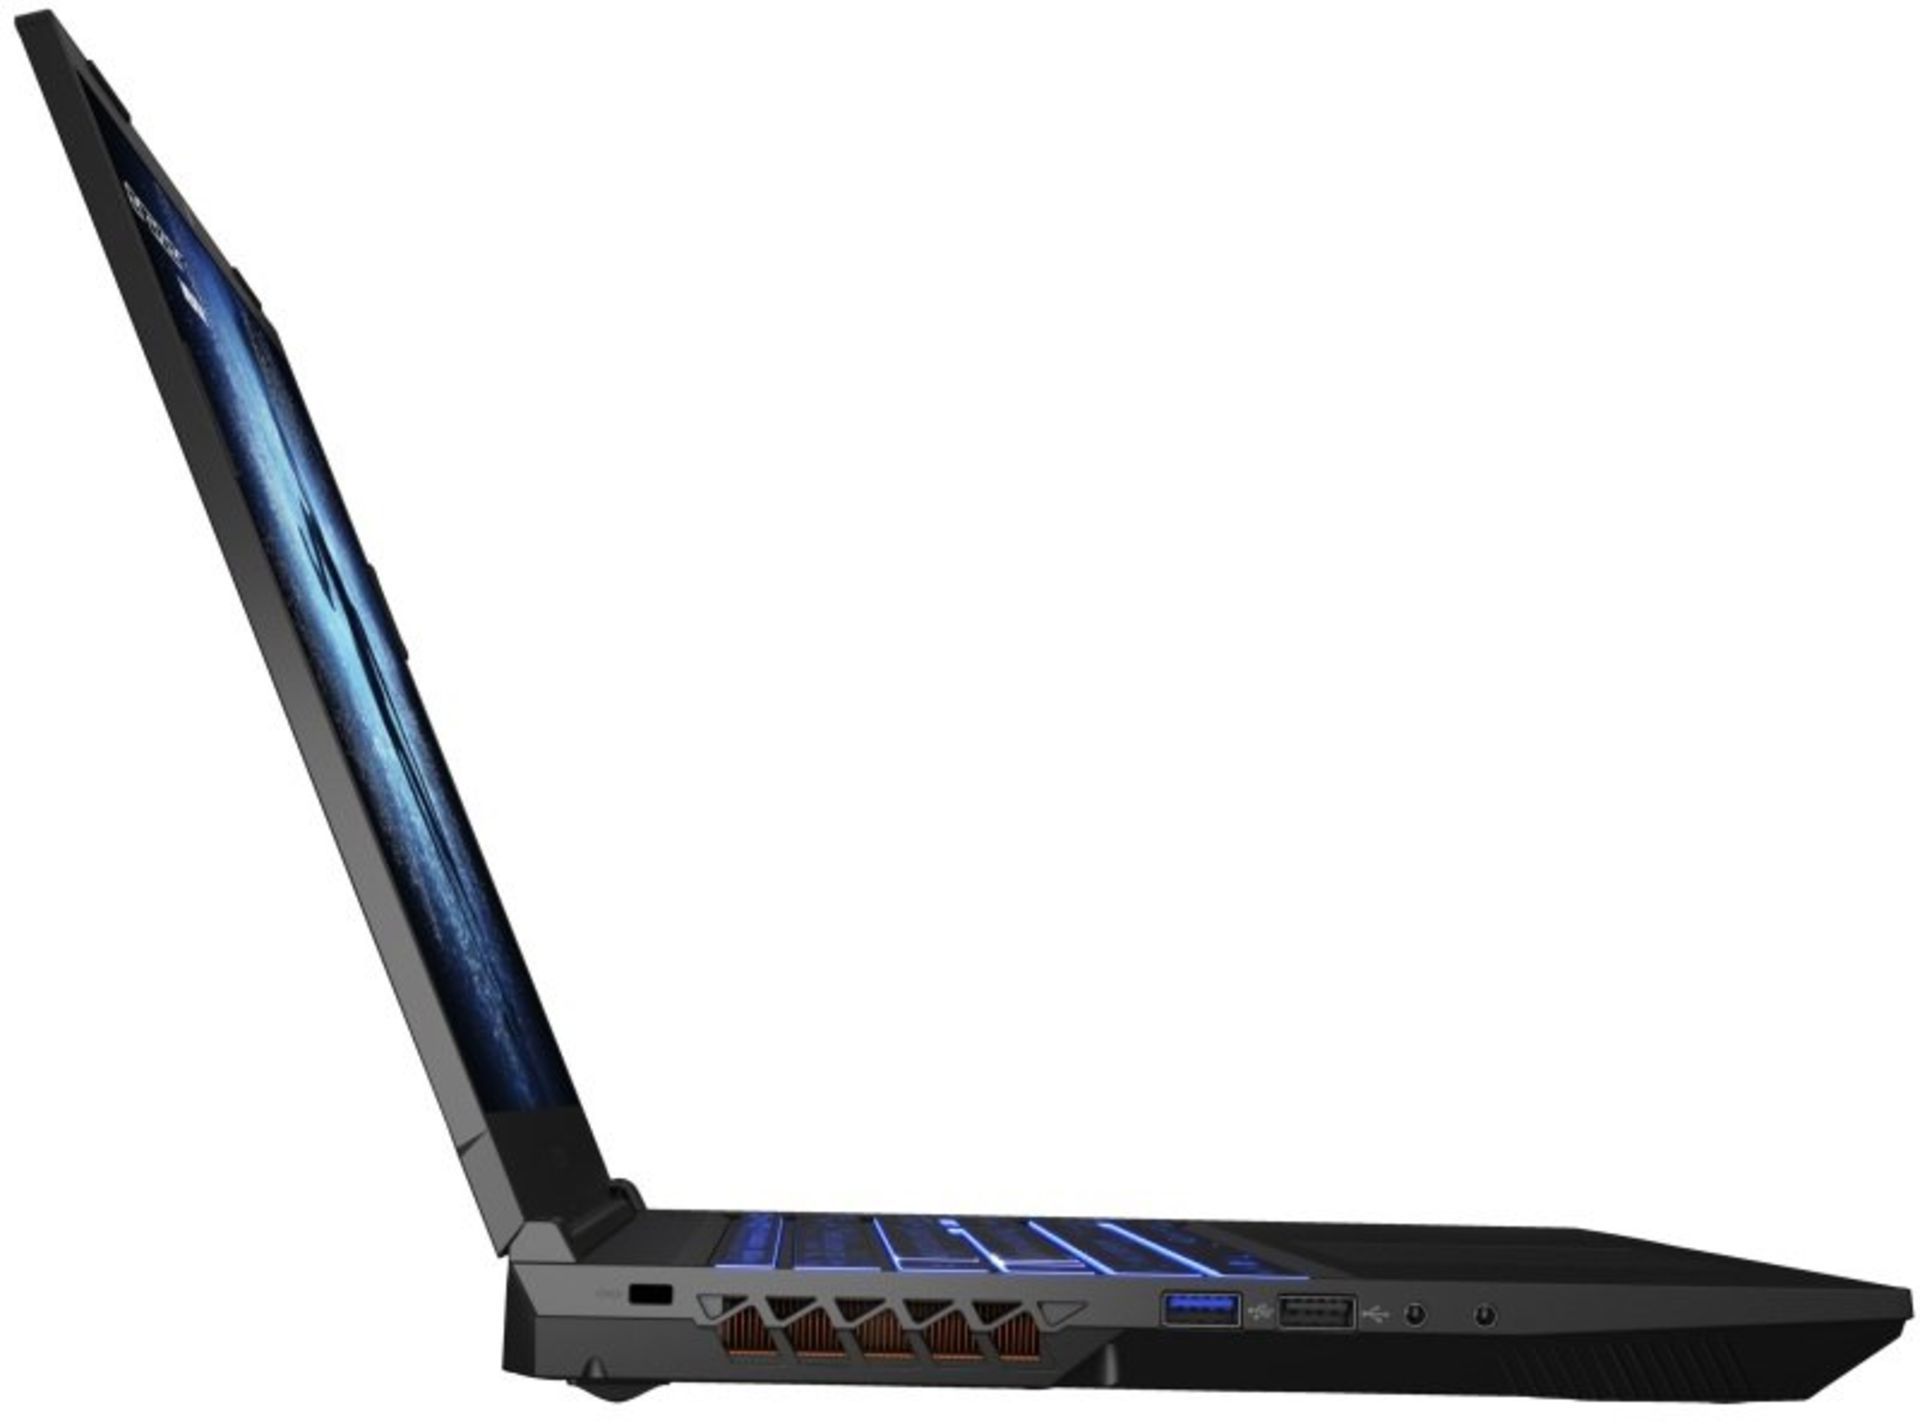 NEW & BOXED MEDION Erazer Deputy P50 - MD 62533 Gaming Laptop. RRP £1306.66. Intel Core i7-12700H, - Image 5 of 6